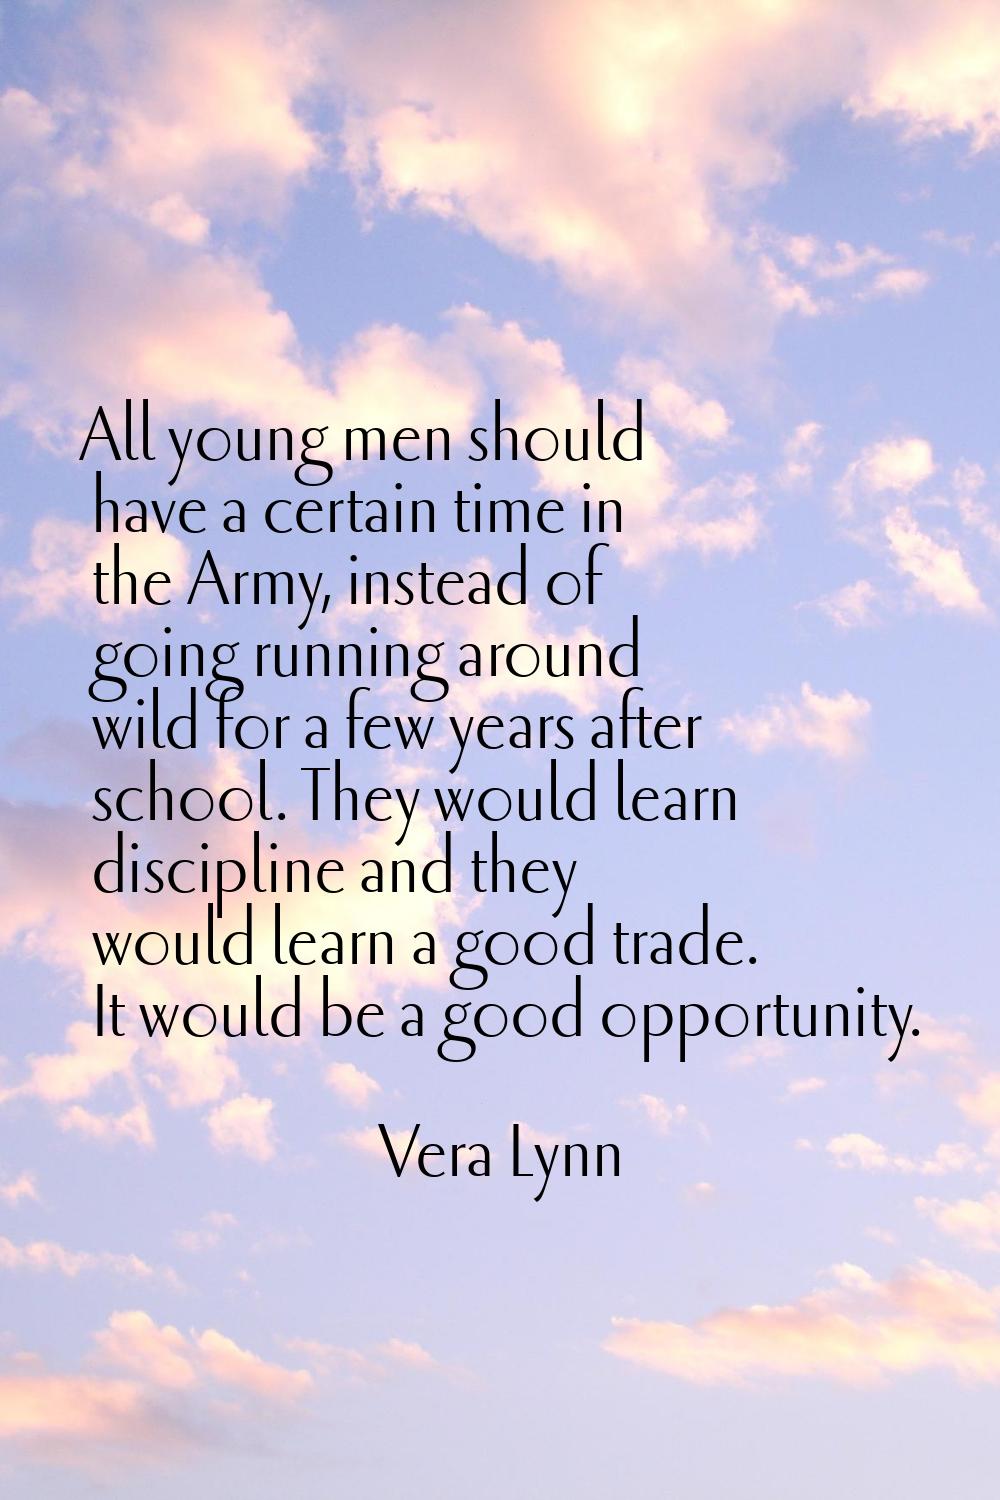 All young men should have a certain time in the Army, instead of going running around wild for a fe